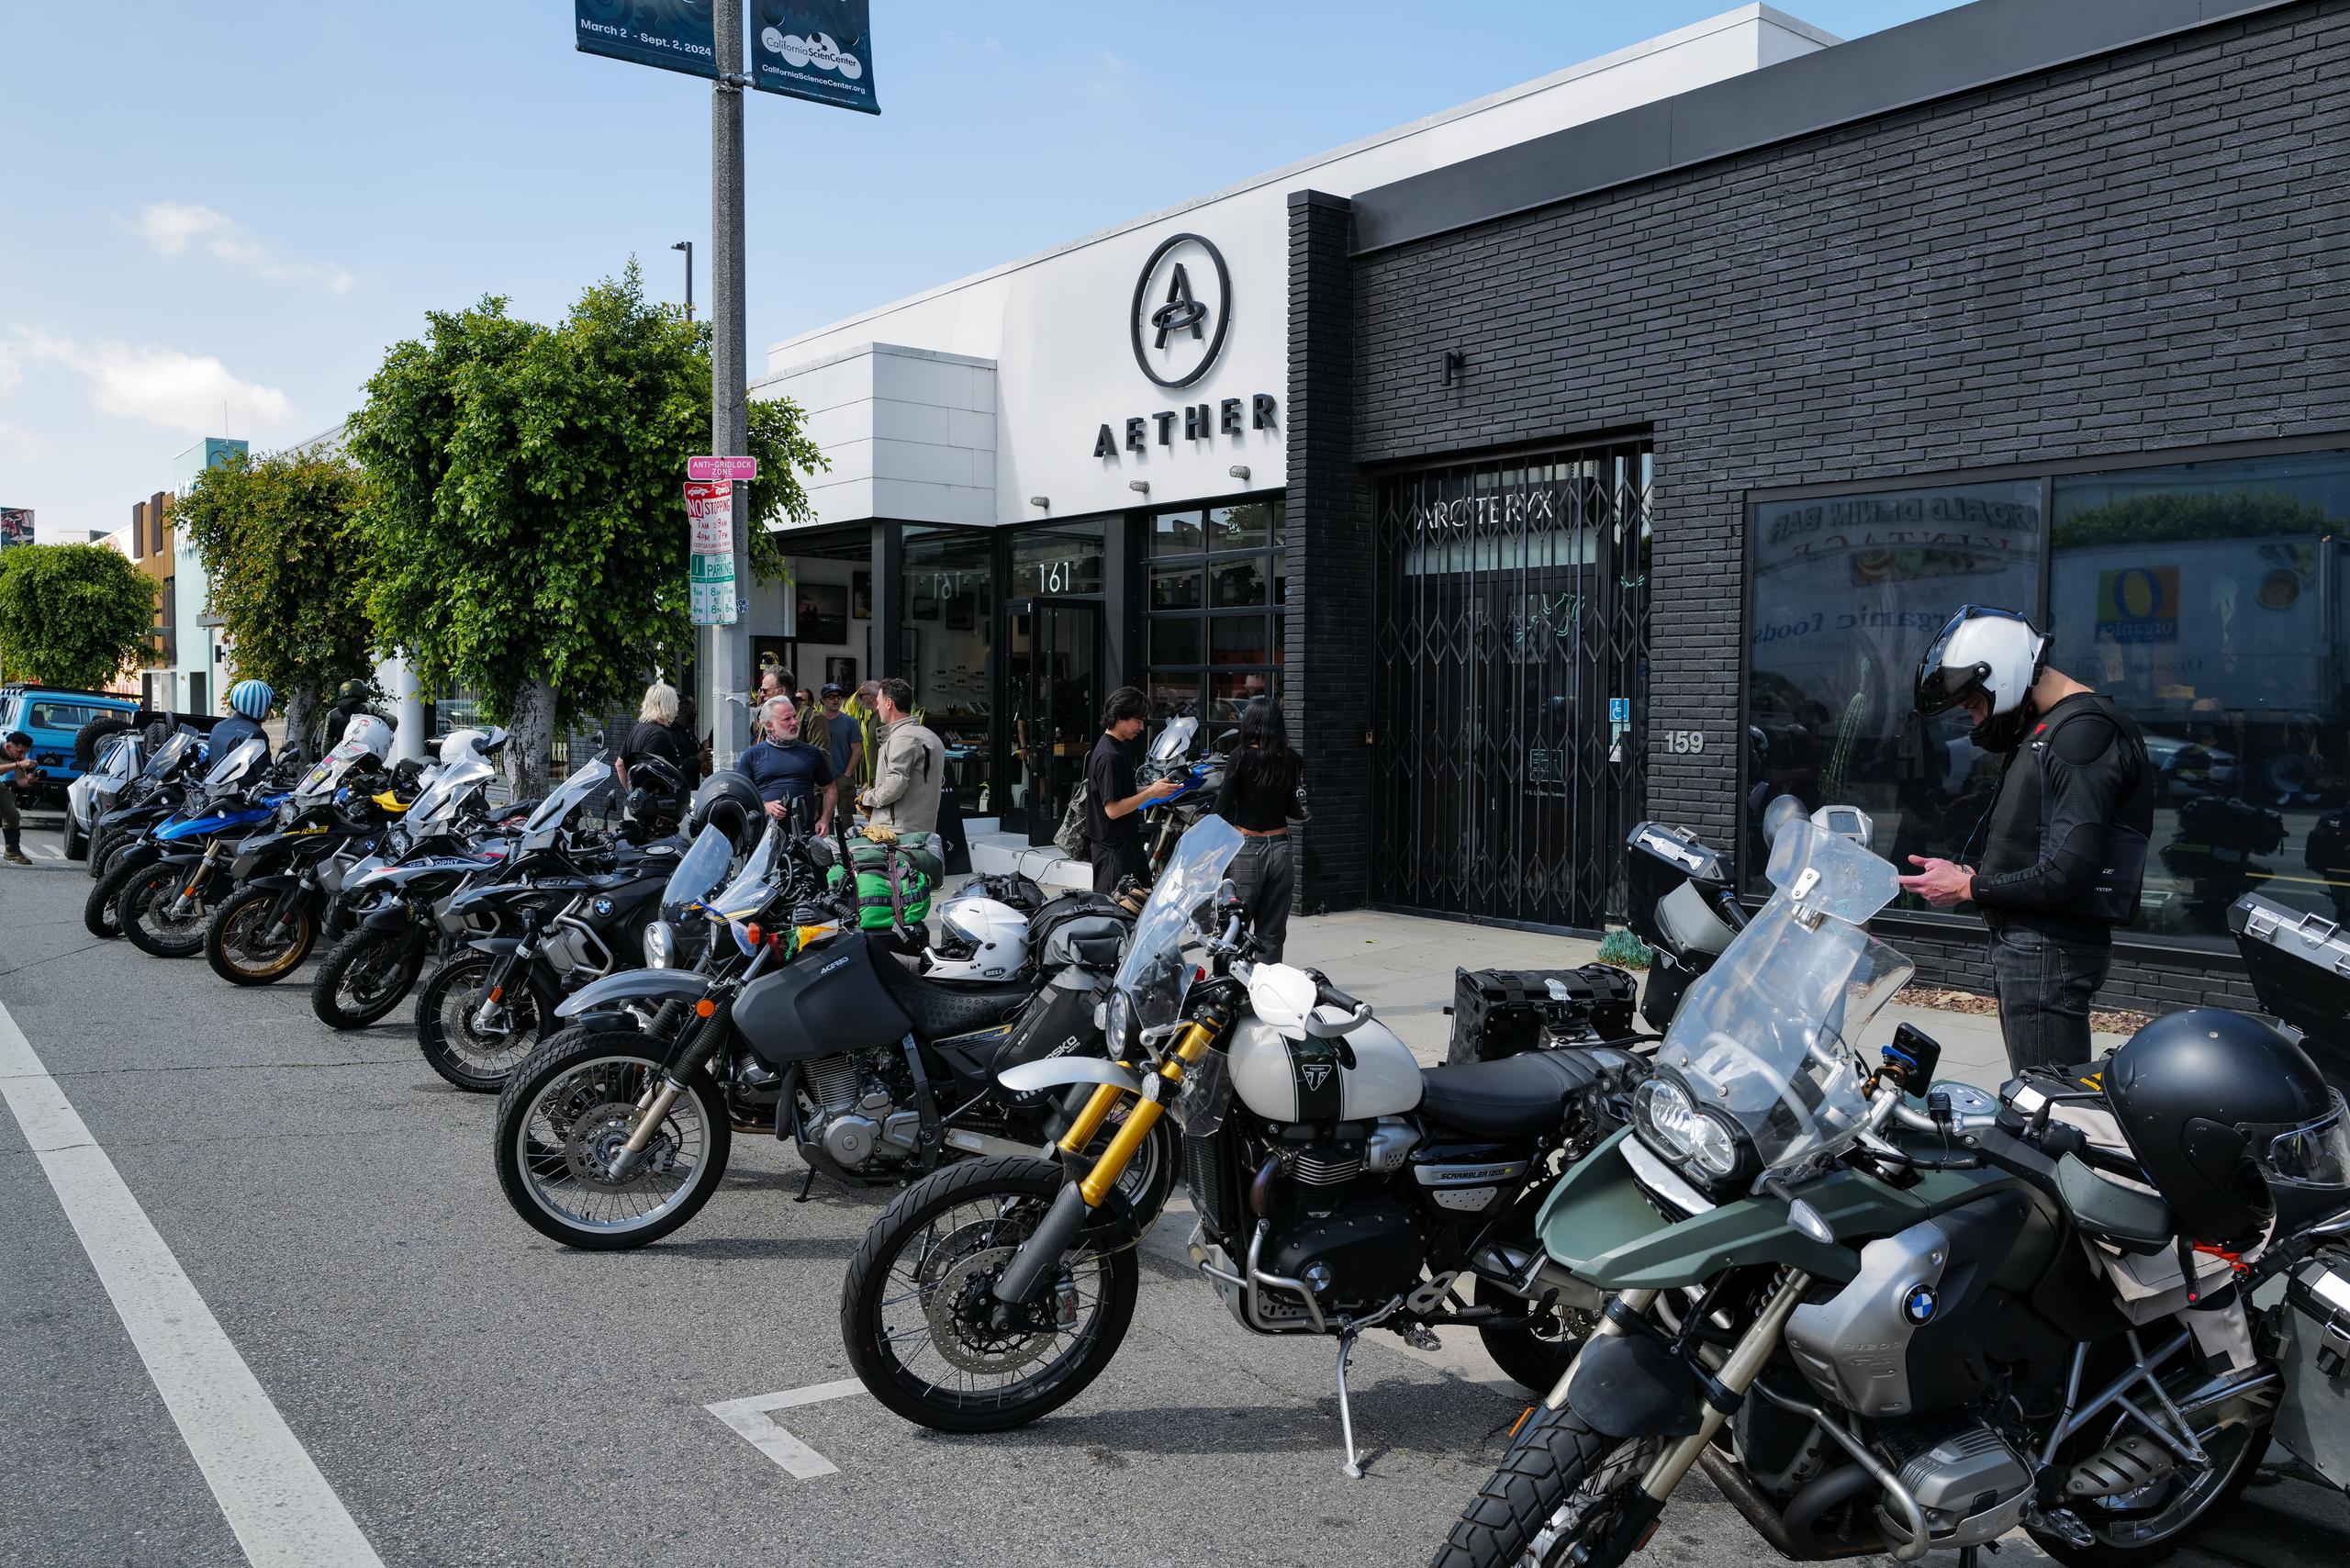 Motorcycles lined up in front of AETHER store in Los Angeles